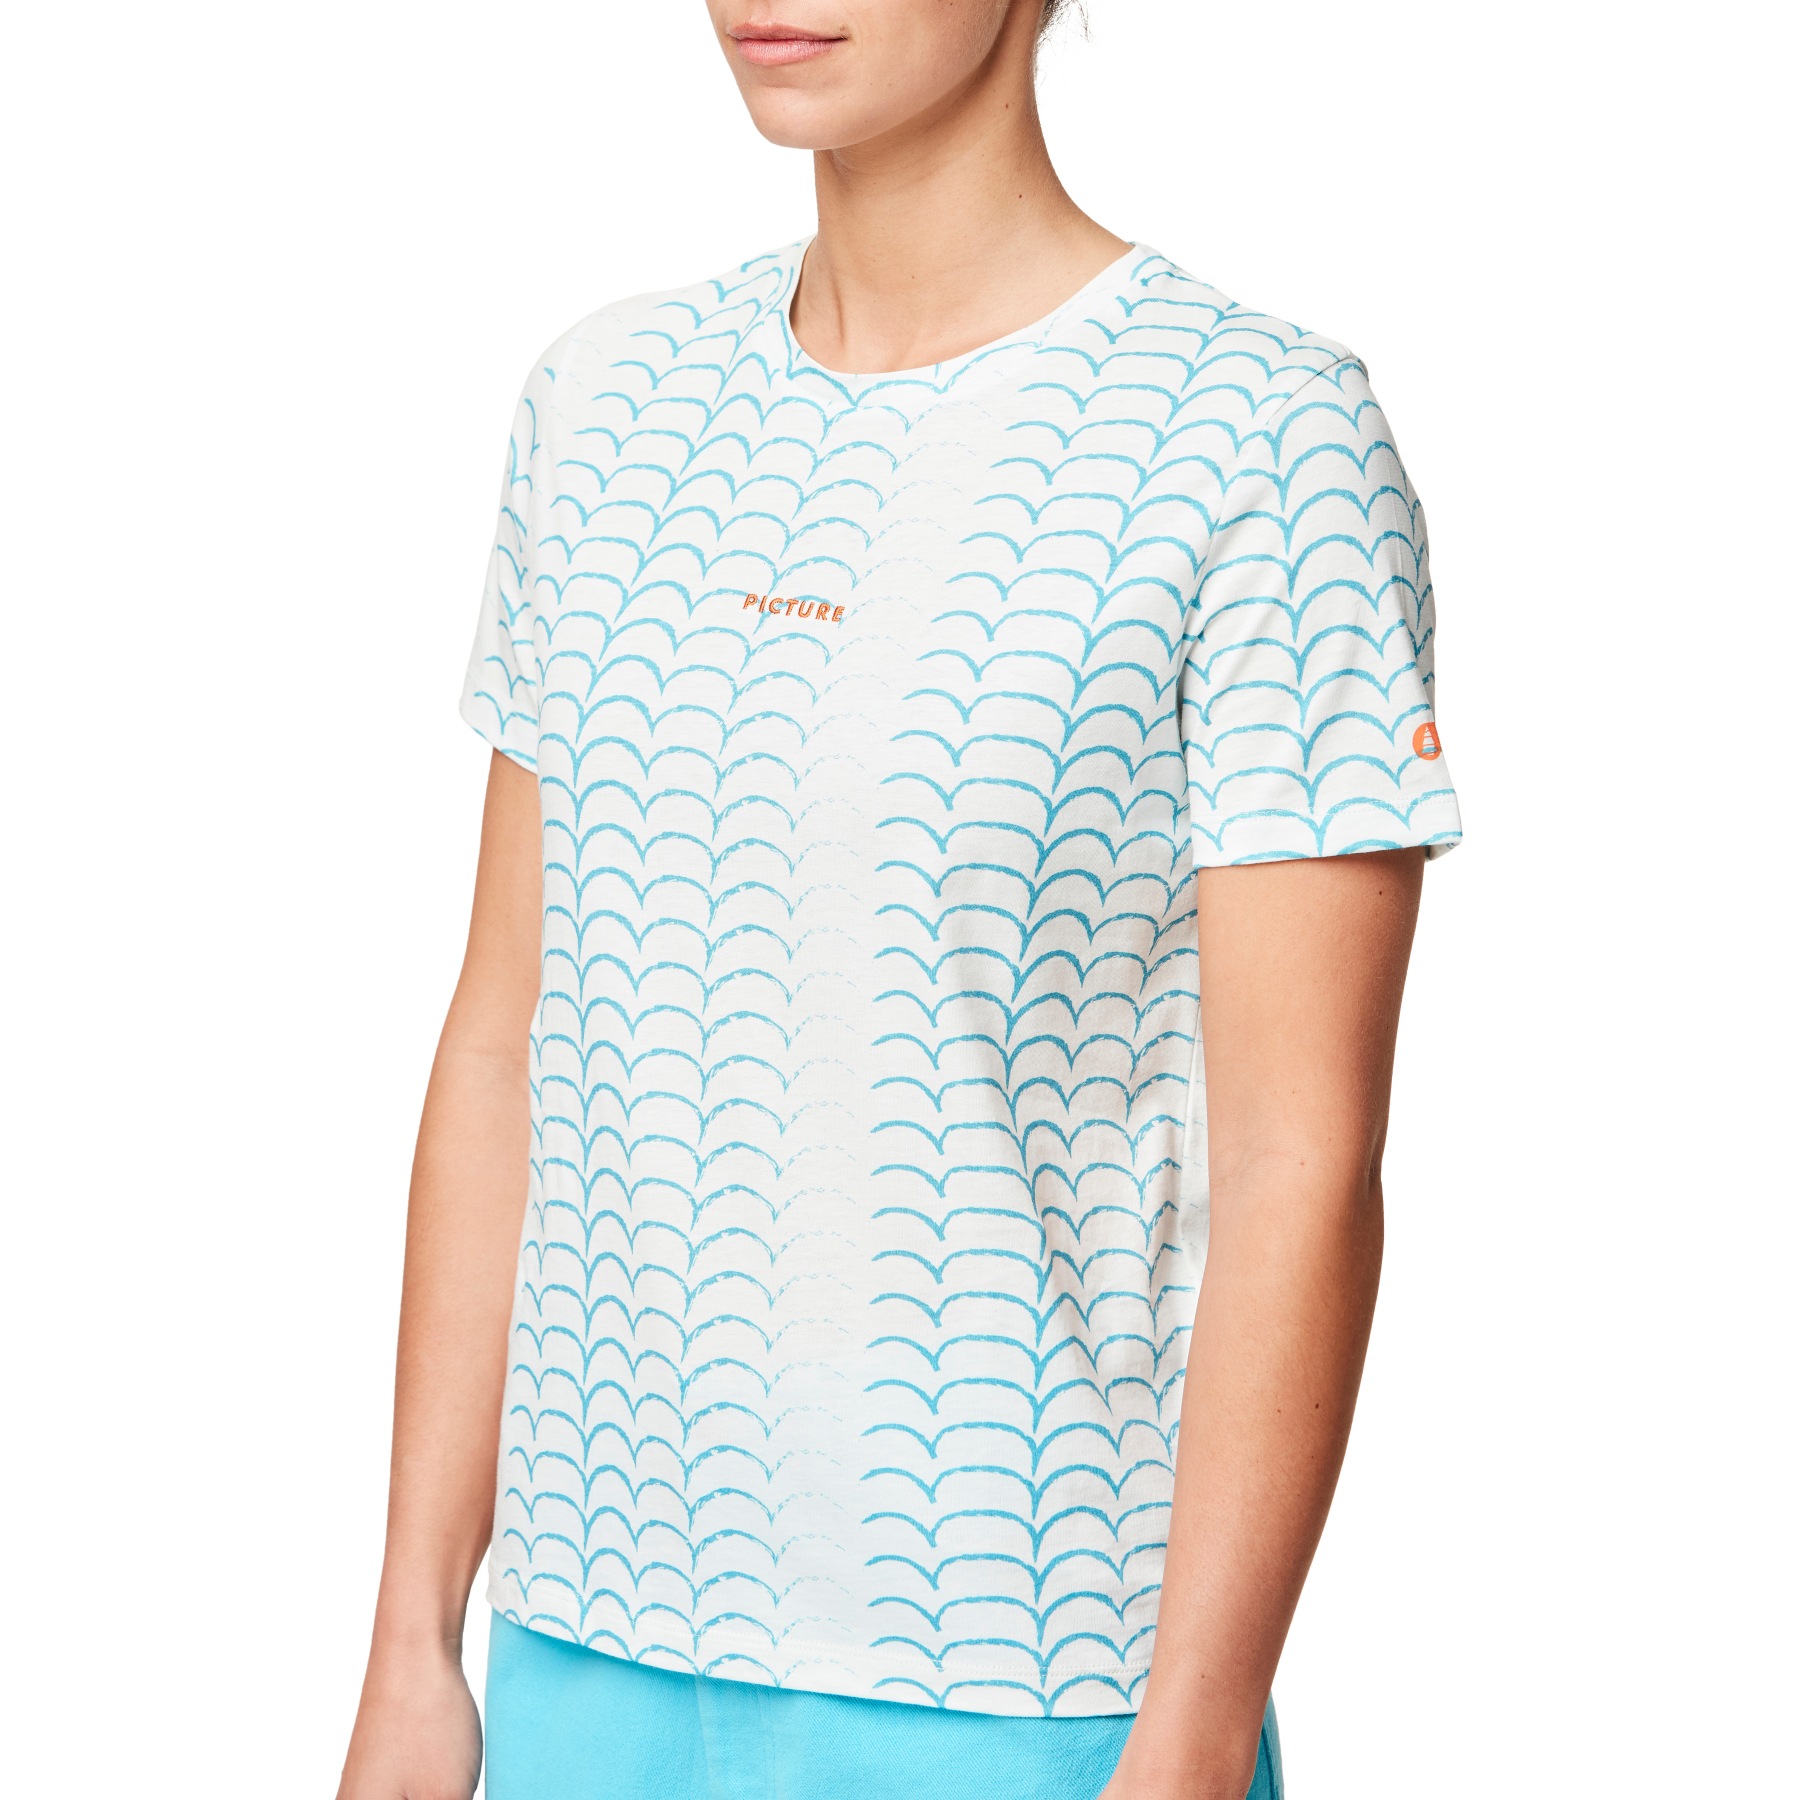 Picture of Picture Aulden Tee Women - Water Stripes Print